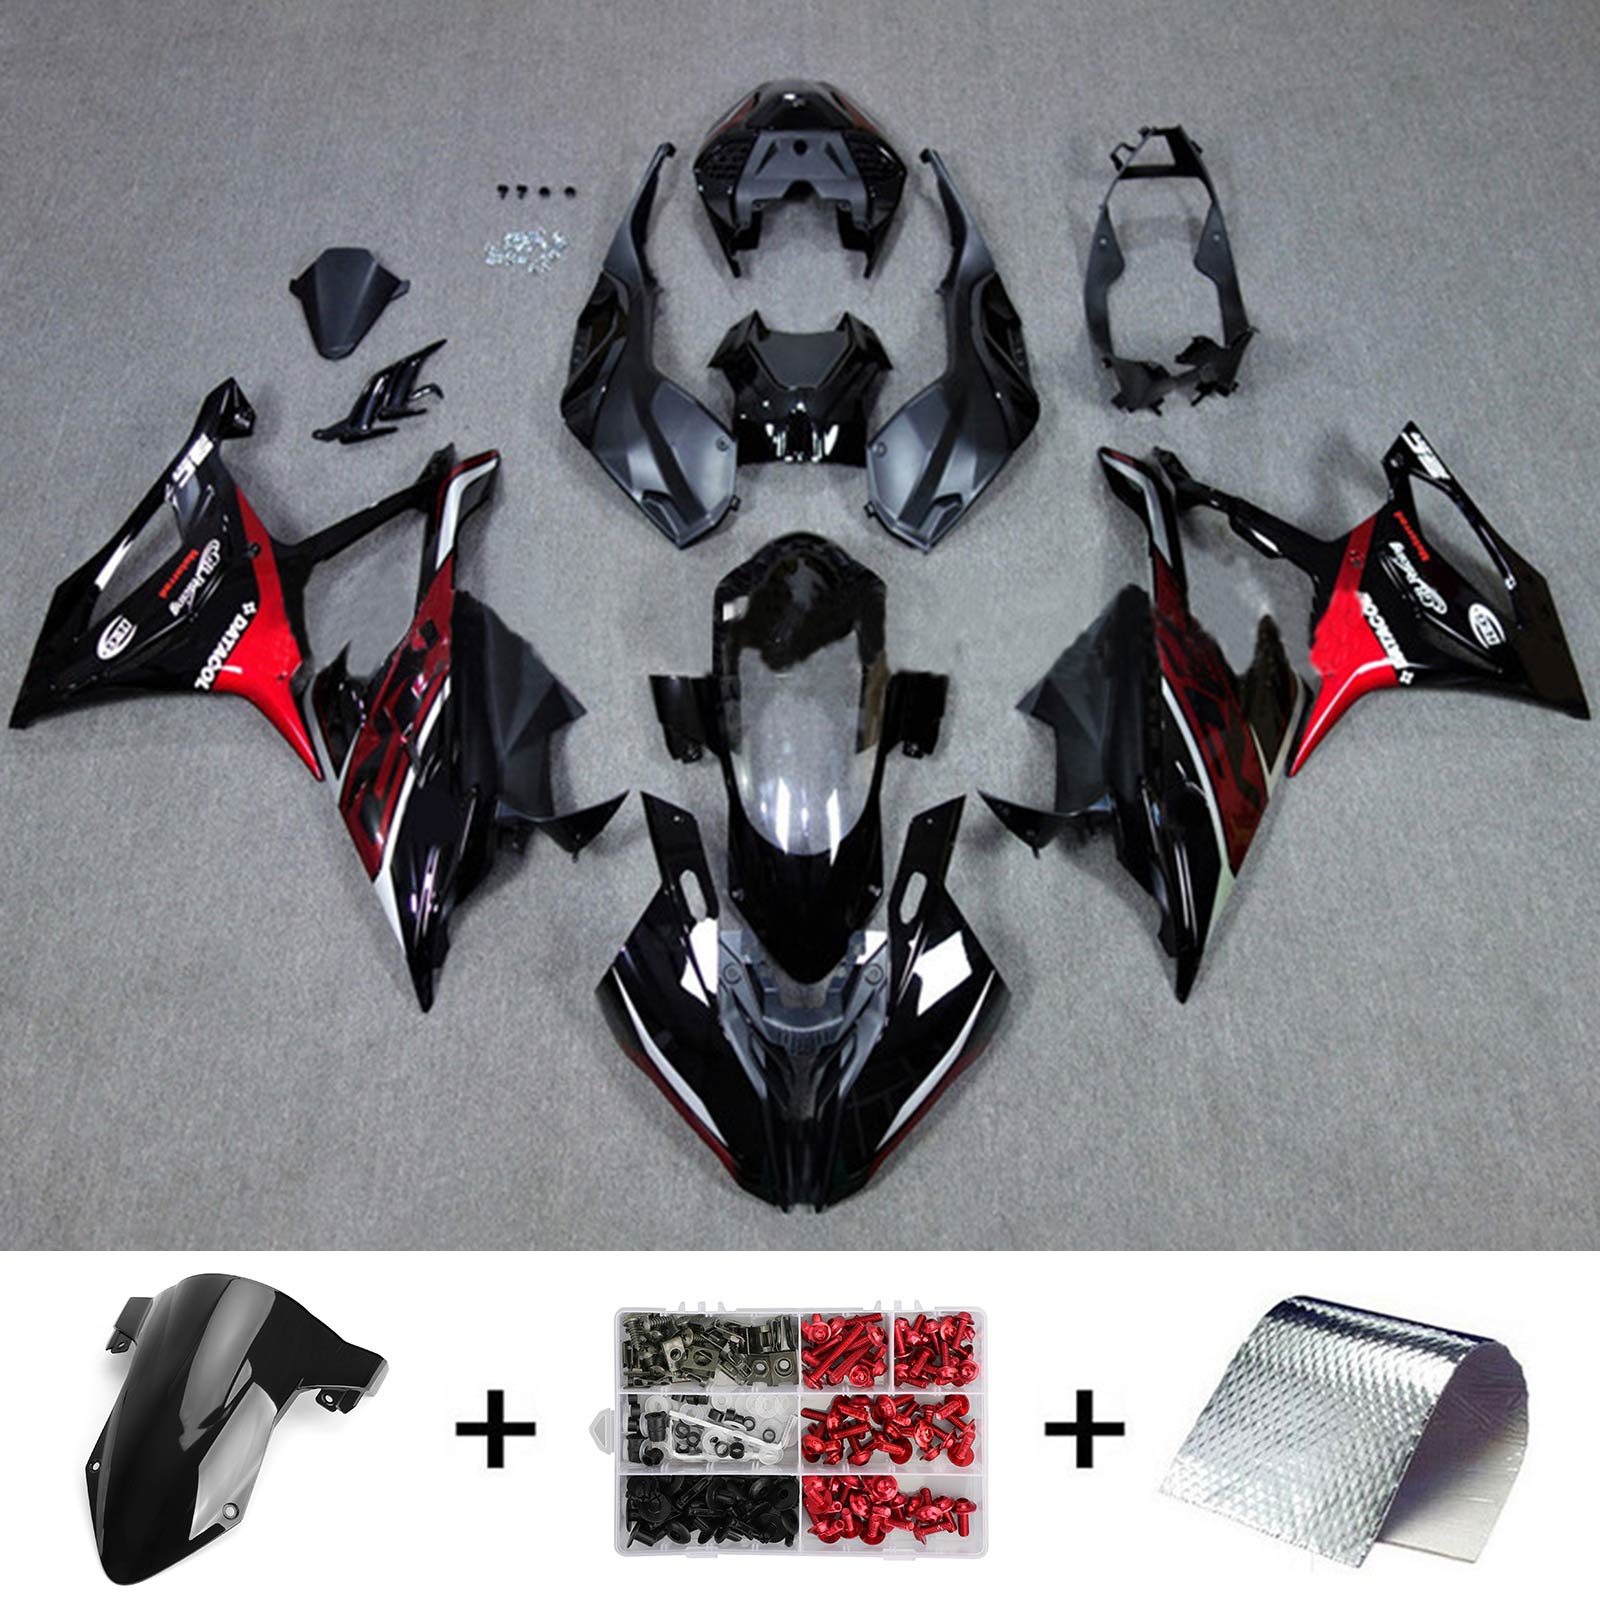 Amotopart 2019-2022 Kit carena racing rosso scuro BMW S1000RR/M1000RR